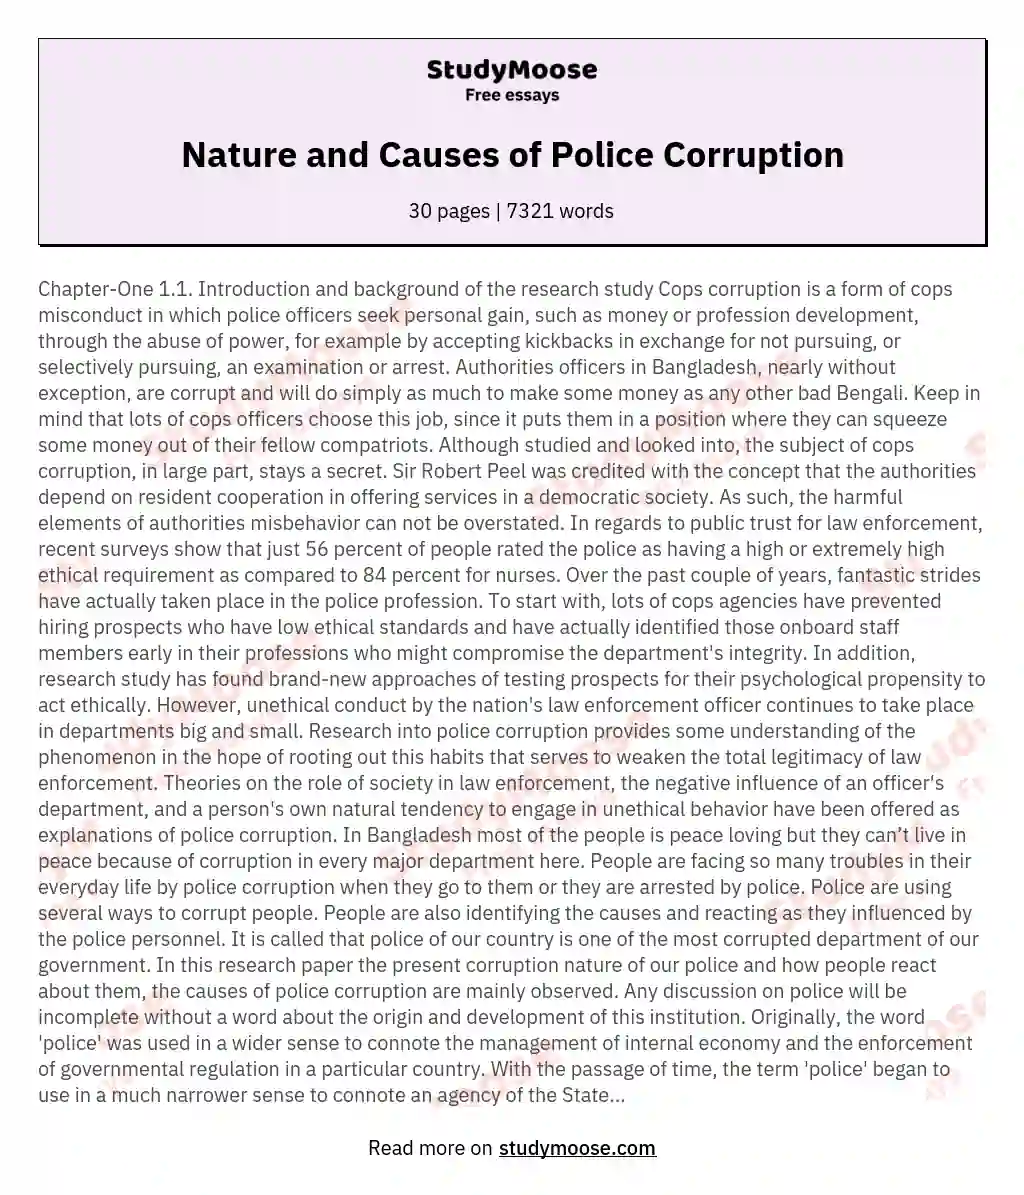 Nature and Causes of Police Corruption essay